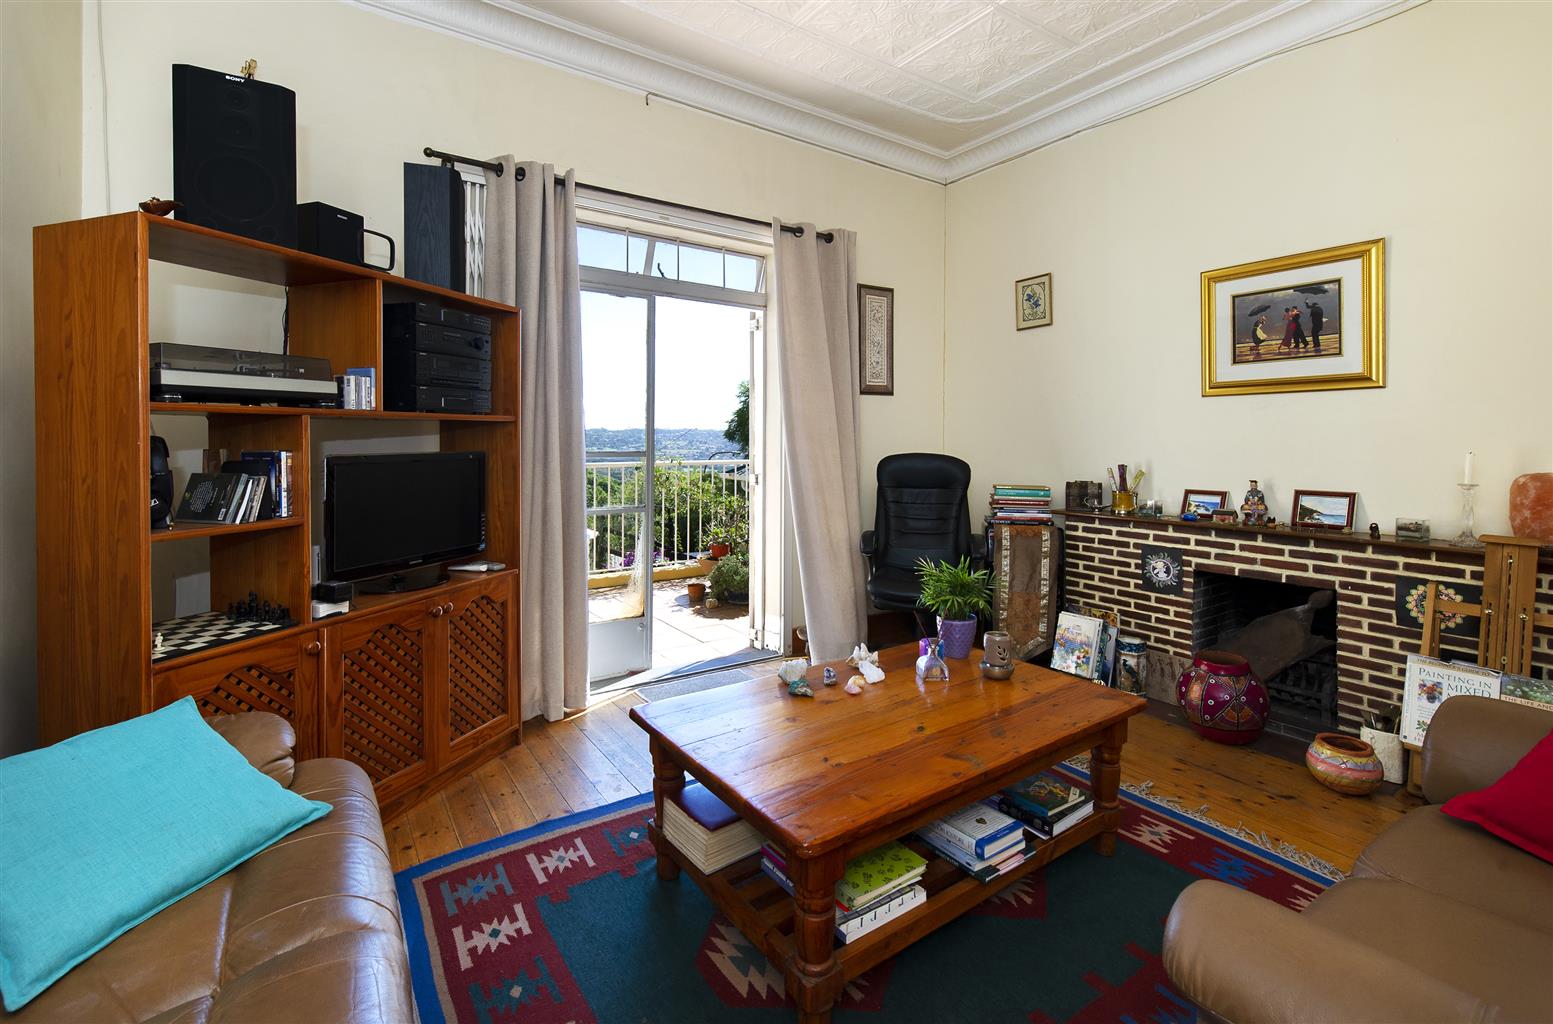 3 Bedroom Delightful Family Home Going on Auction